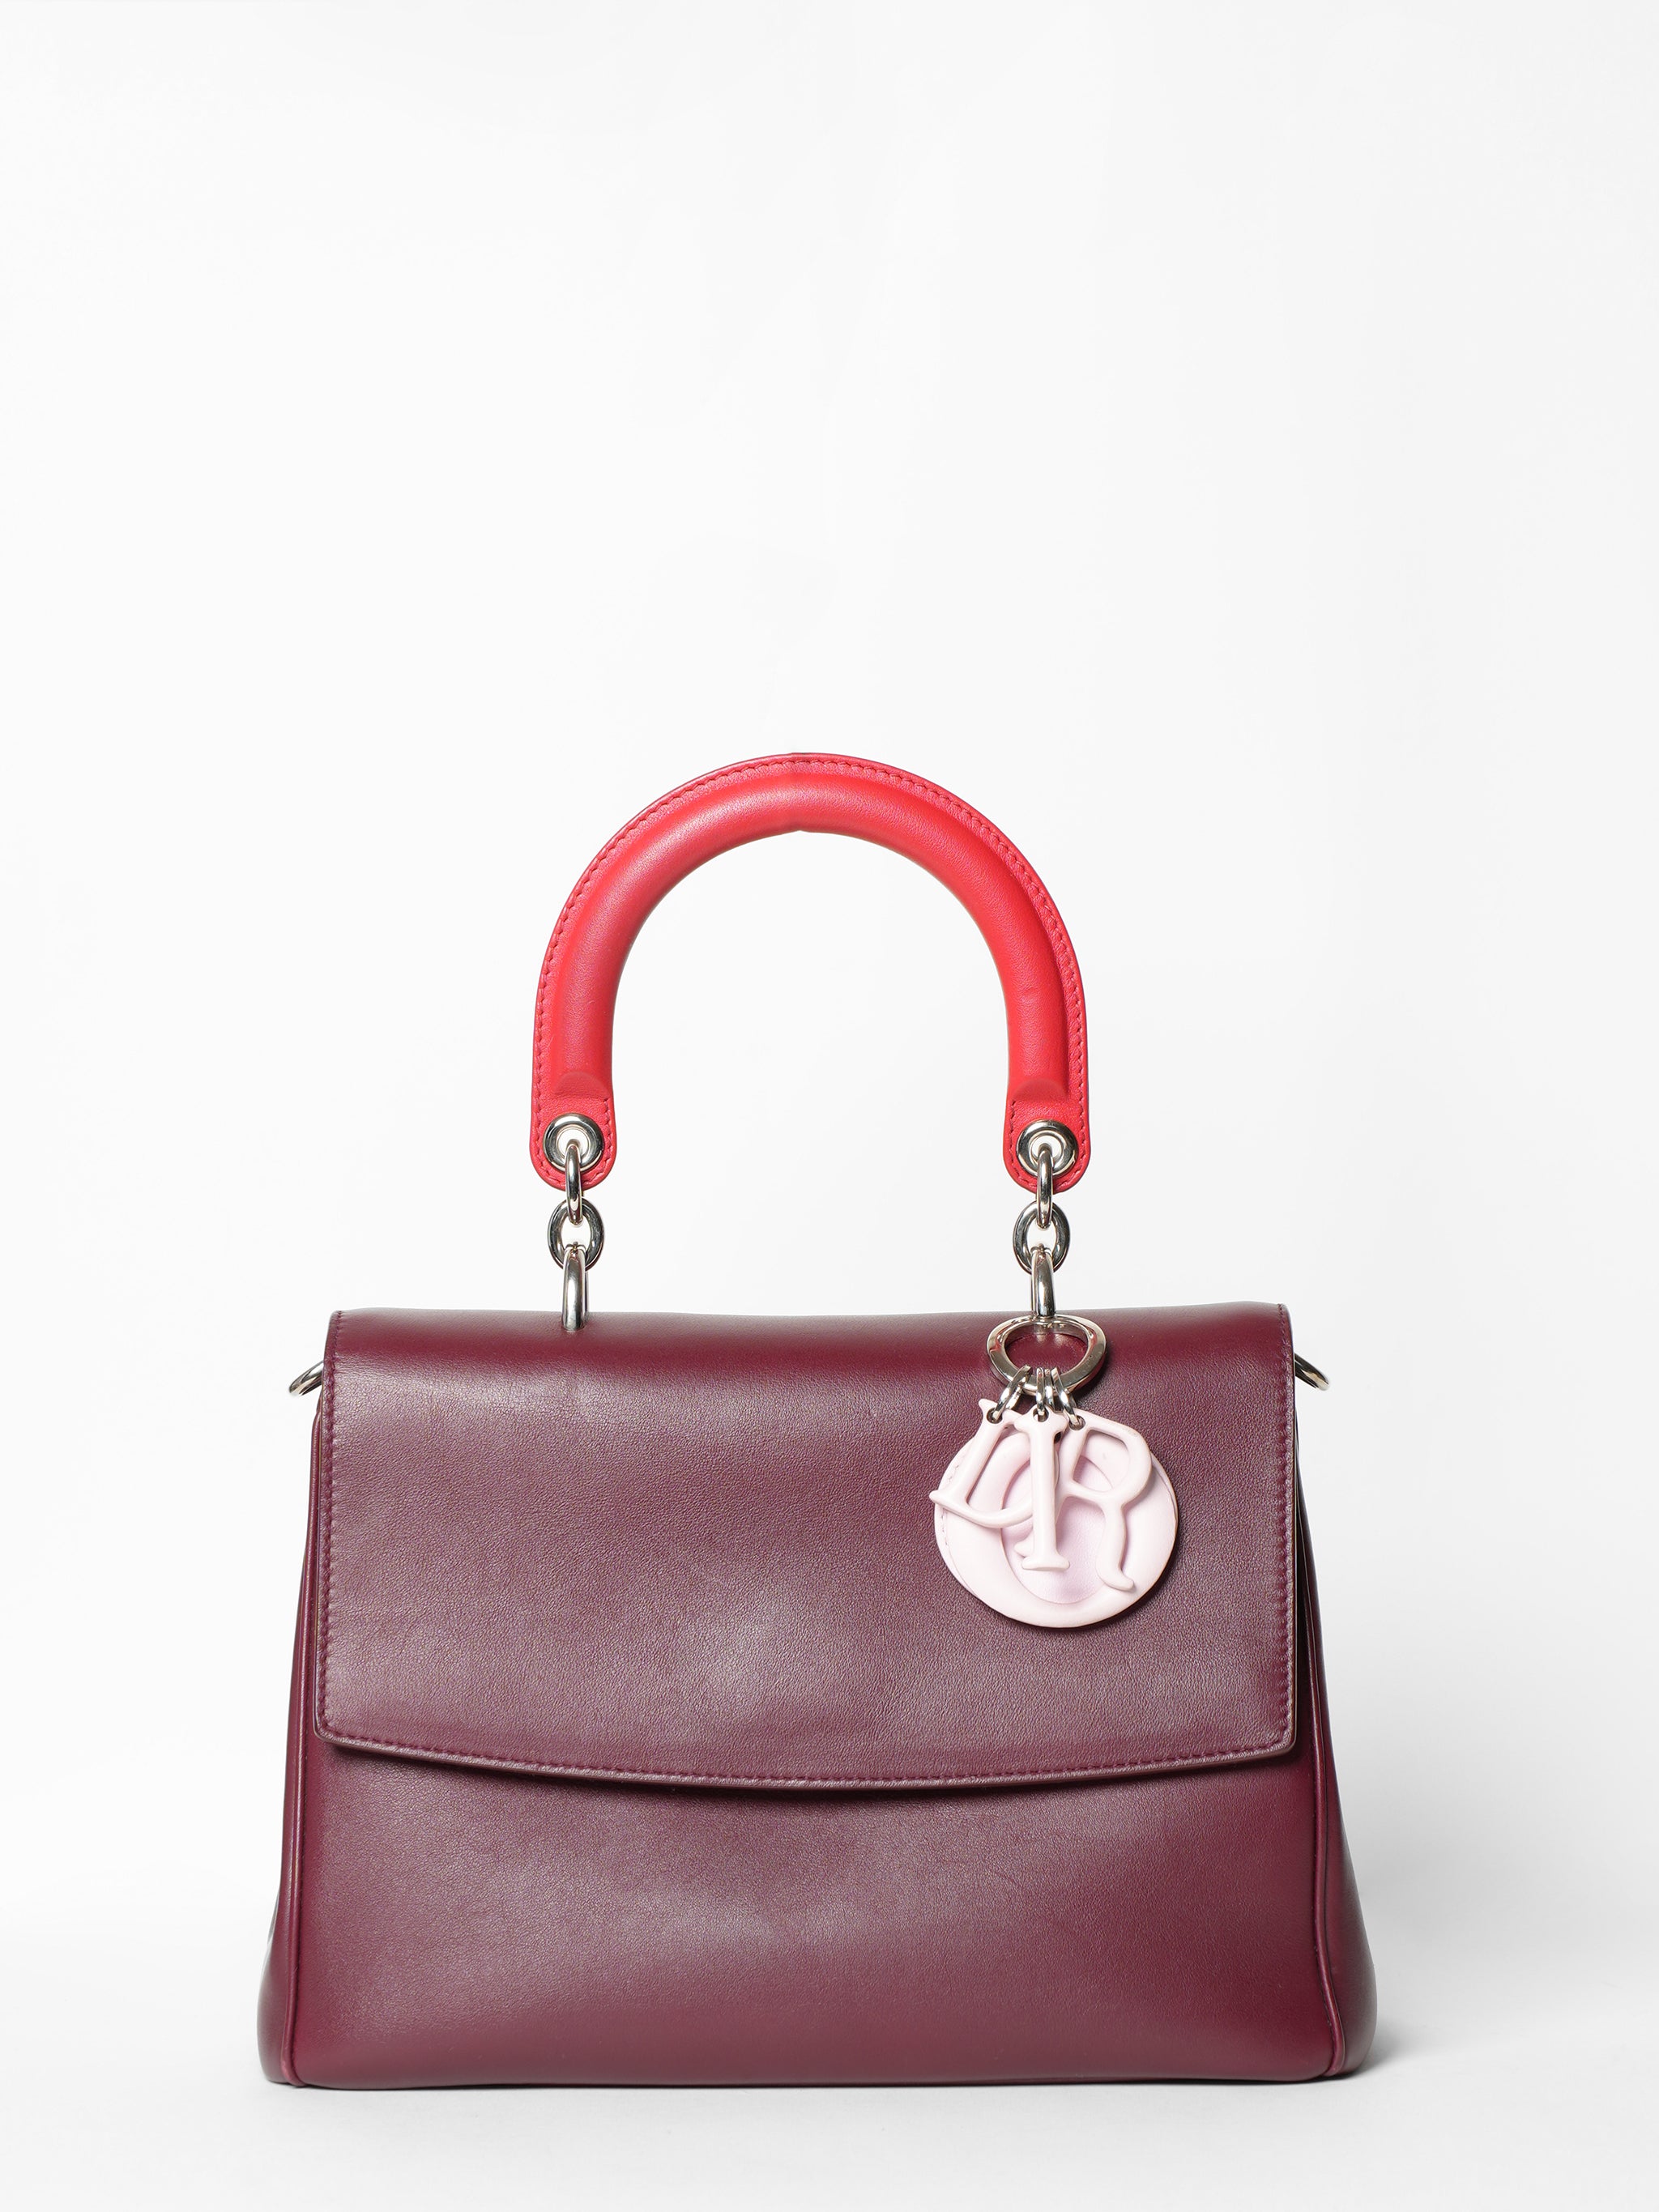 Christian Dior Be Dior Bag 2015 Cruise Collection(Small)